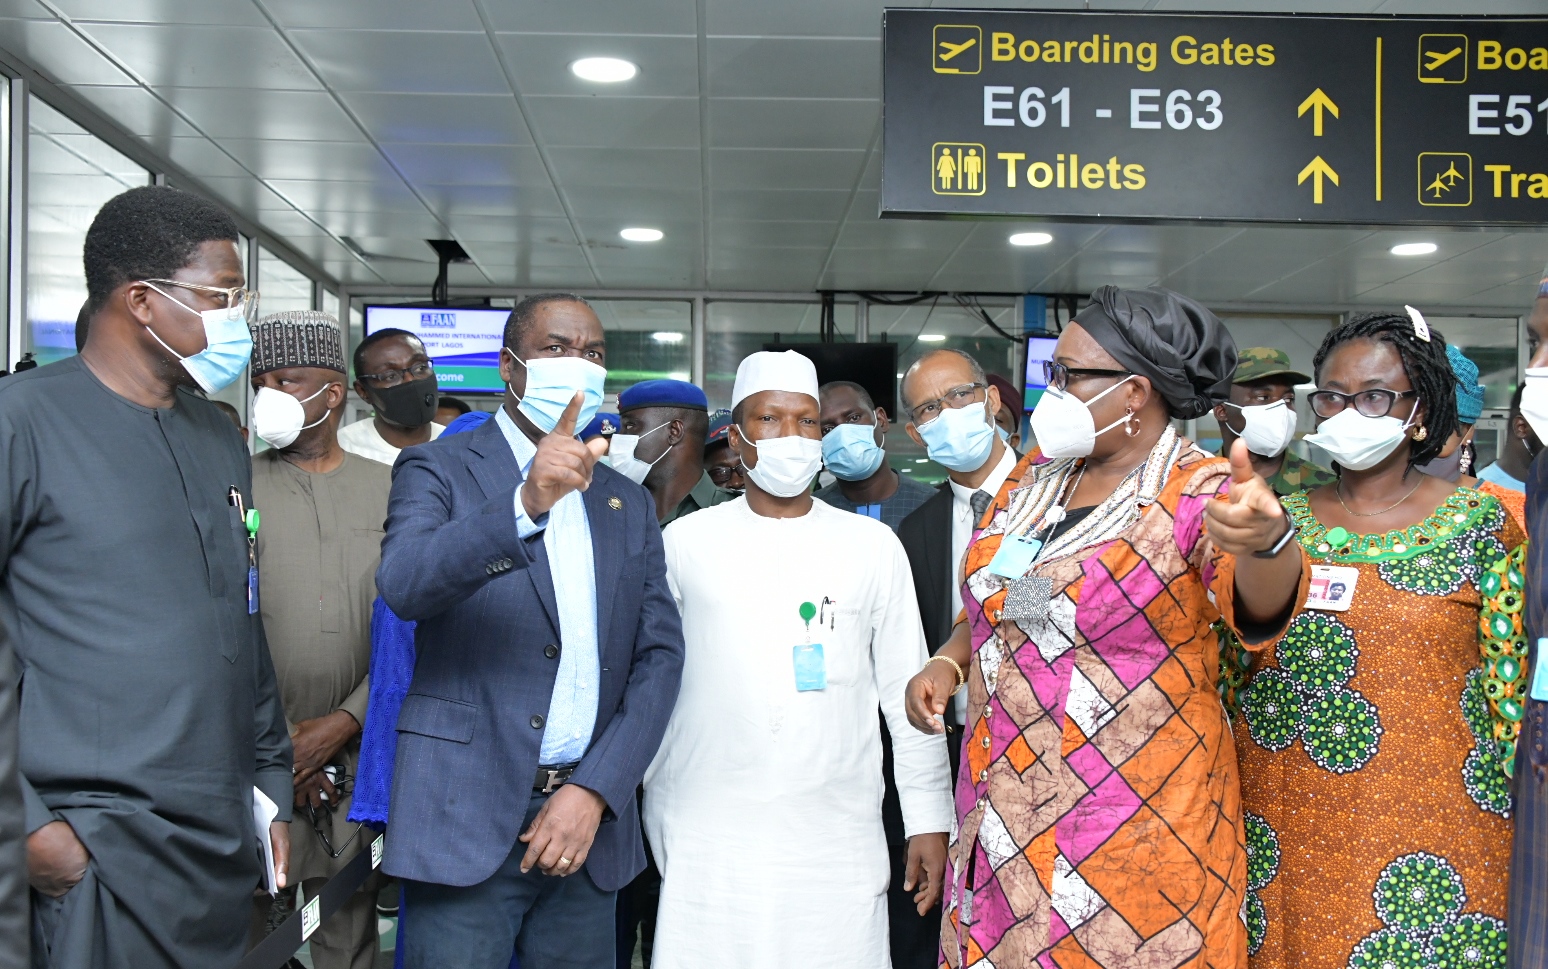 L-R: Lagos Head of Service, Mr. Hakeem Muri-Okunola; the State Deputy Governor, Dr. Obafemi Hamzat; Managing Director/CE, Federal Airports Authority of Nigeria (FAAN), Capt. Rabiu Hamisu Yadudu; Commissioner for Health, Prof. Akin Abayomi; Regional General Manager, South West/Airport Manager, MMA, Mrs. Victoria Shin-Aba and General Manager, Operations of FAAN, Mrs. Olajumoke Oni during an inspection of the Murtala Muhammed International Airport ahead of international flights resumption, on Friday, September 4, 2020.   